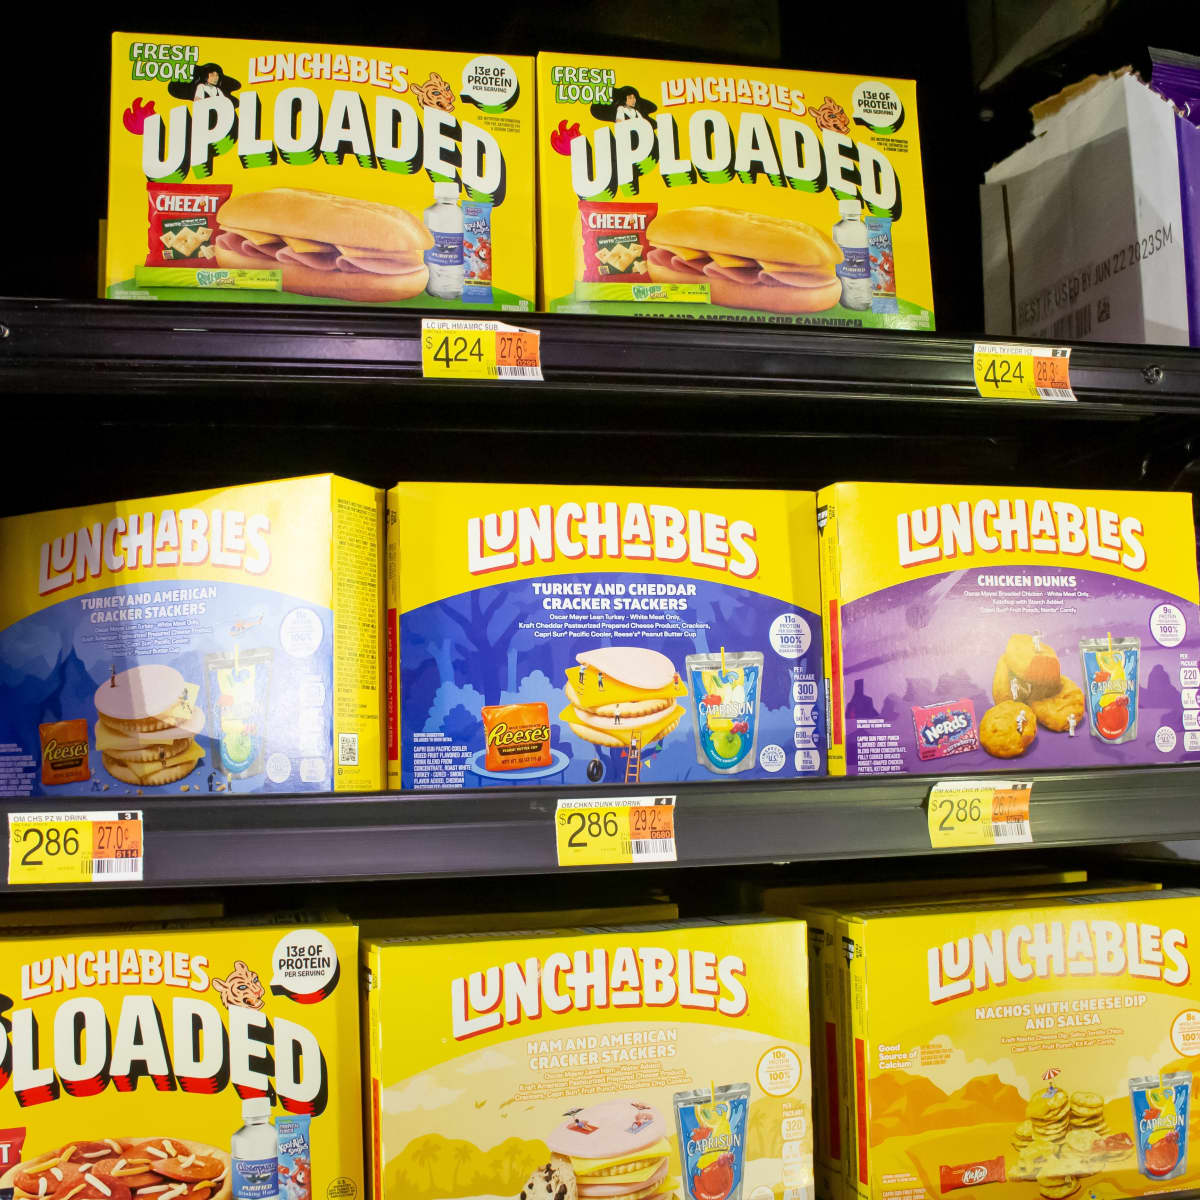 South Dakota Store Has 'Adult Lunchables' & 'Adult Breakfasts